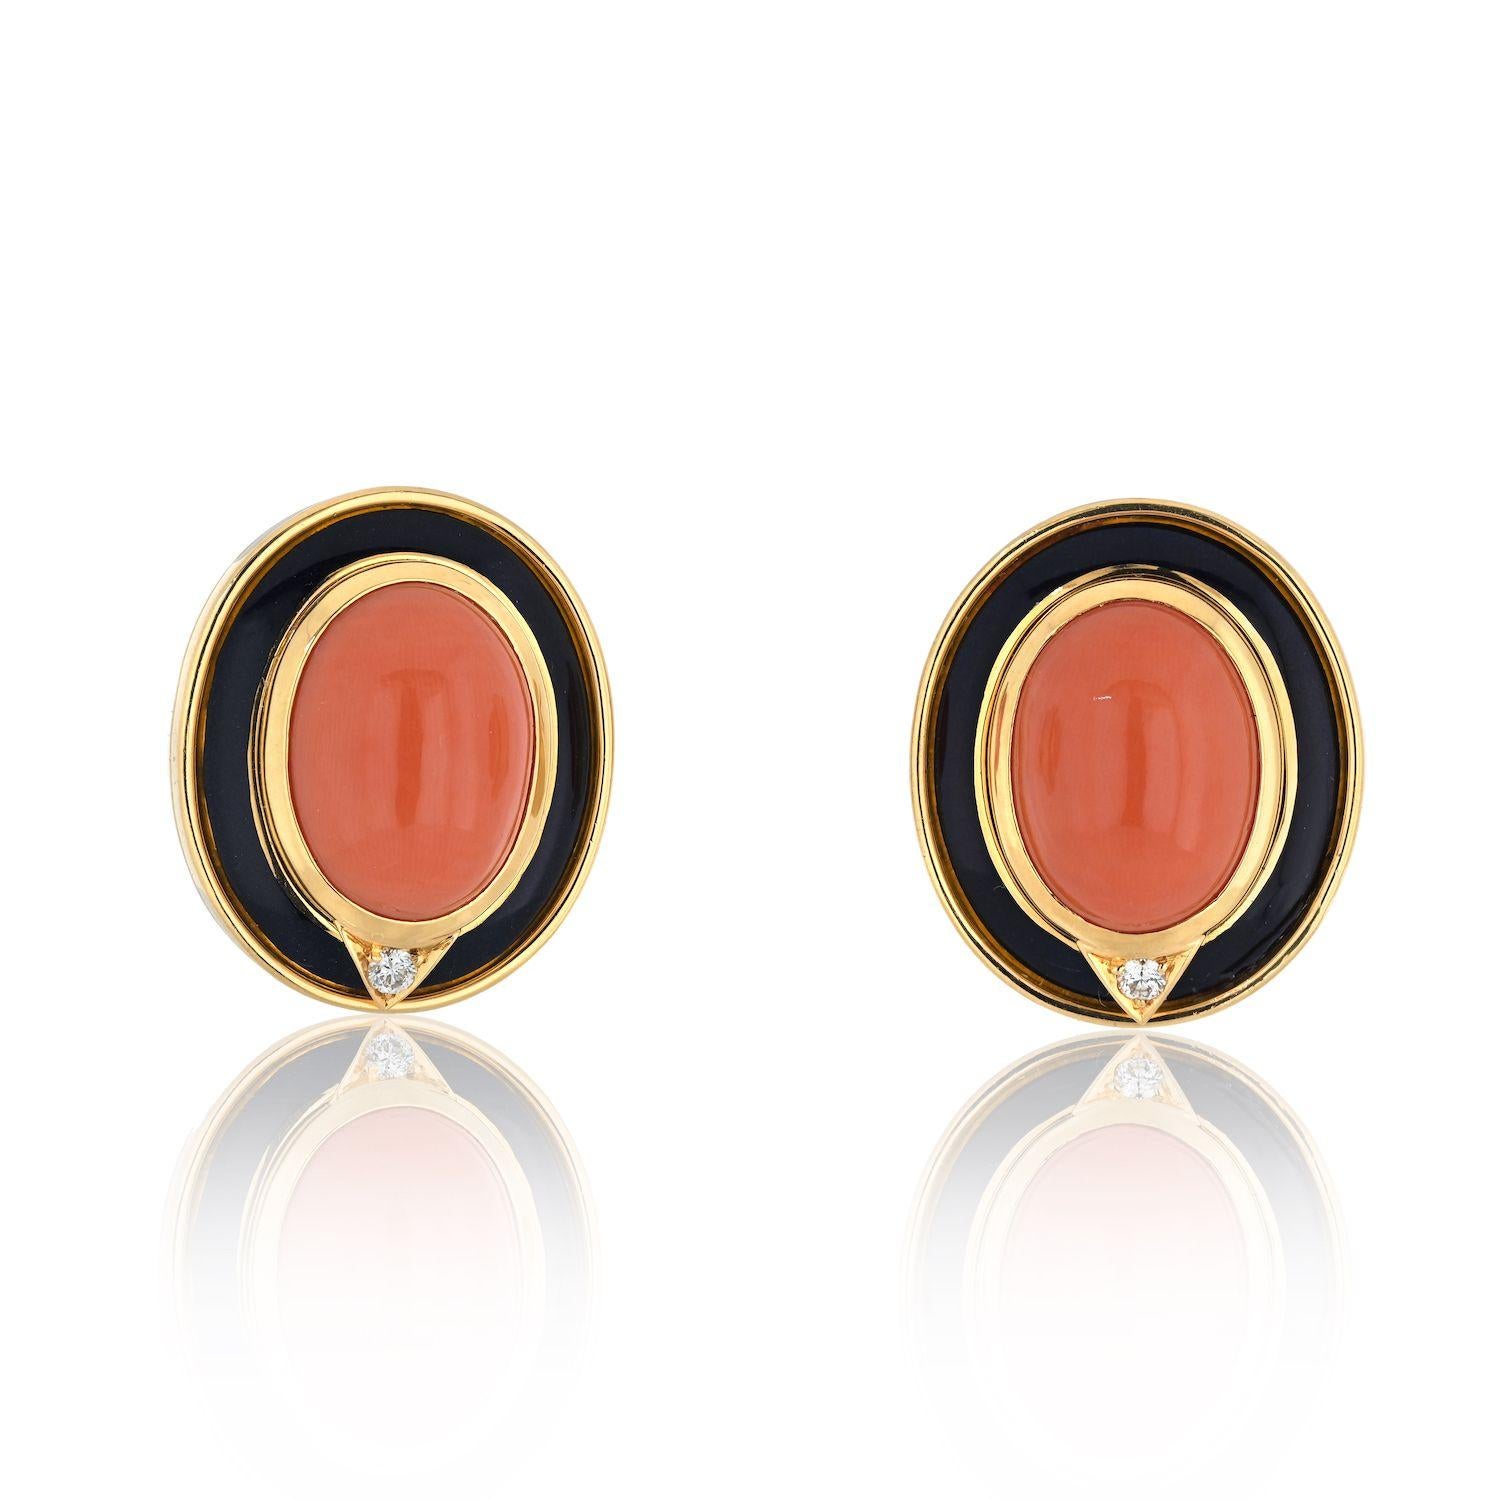 Bvlgari 18K Yellow Gold Coral, Black Enamel, Onyx Earrings In Excellent Condition For Sale In New York, NY